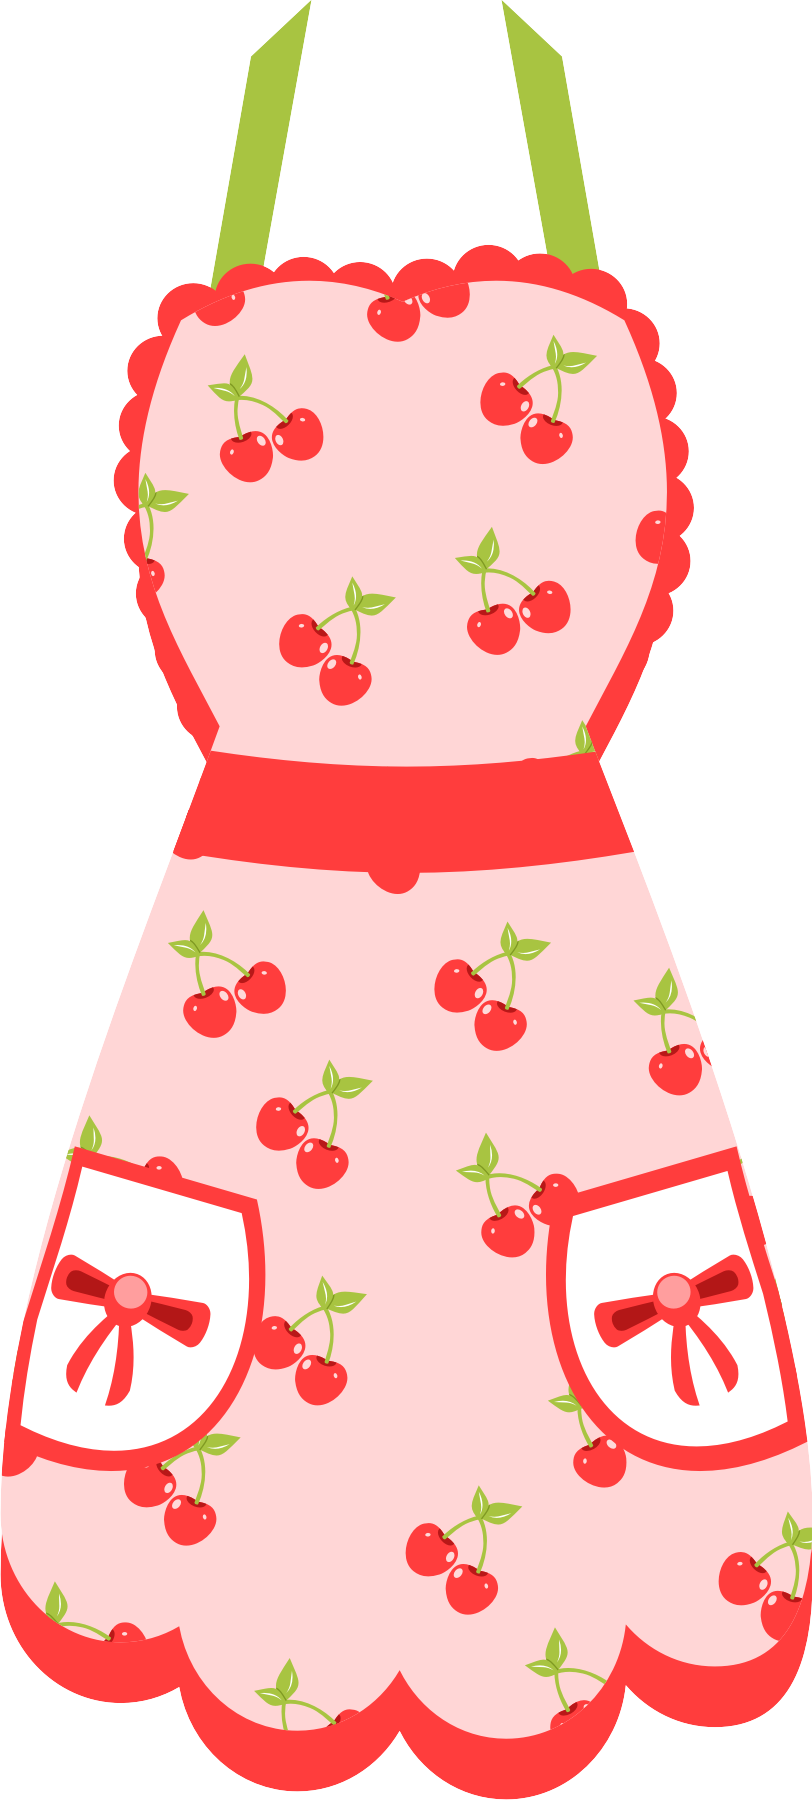 Cherry Patterned Pink Apron PNG